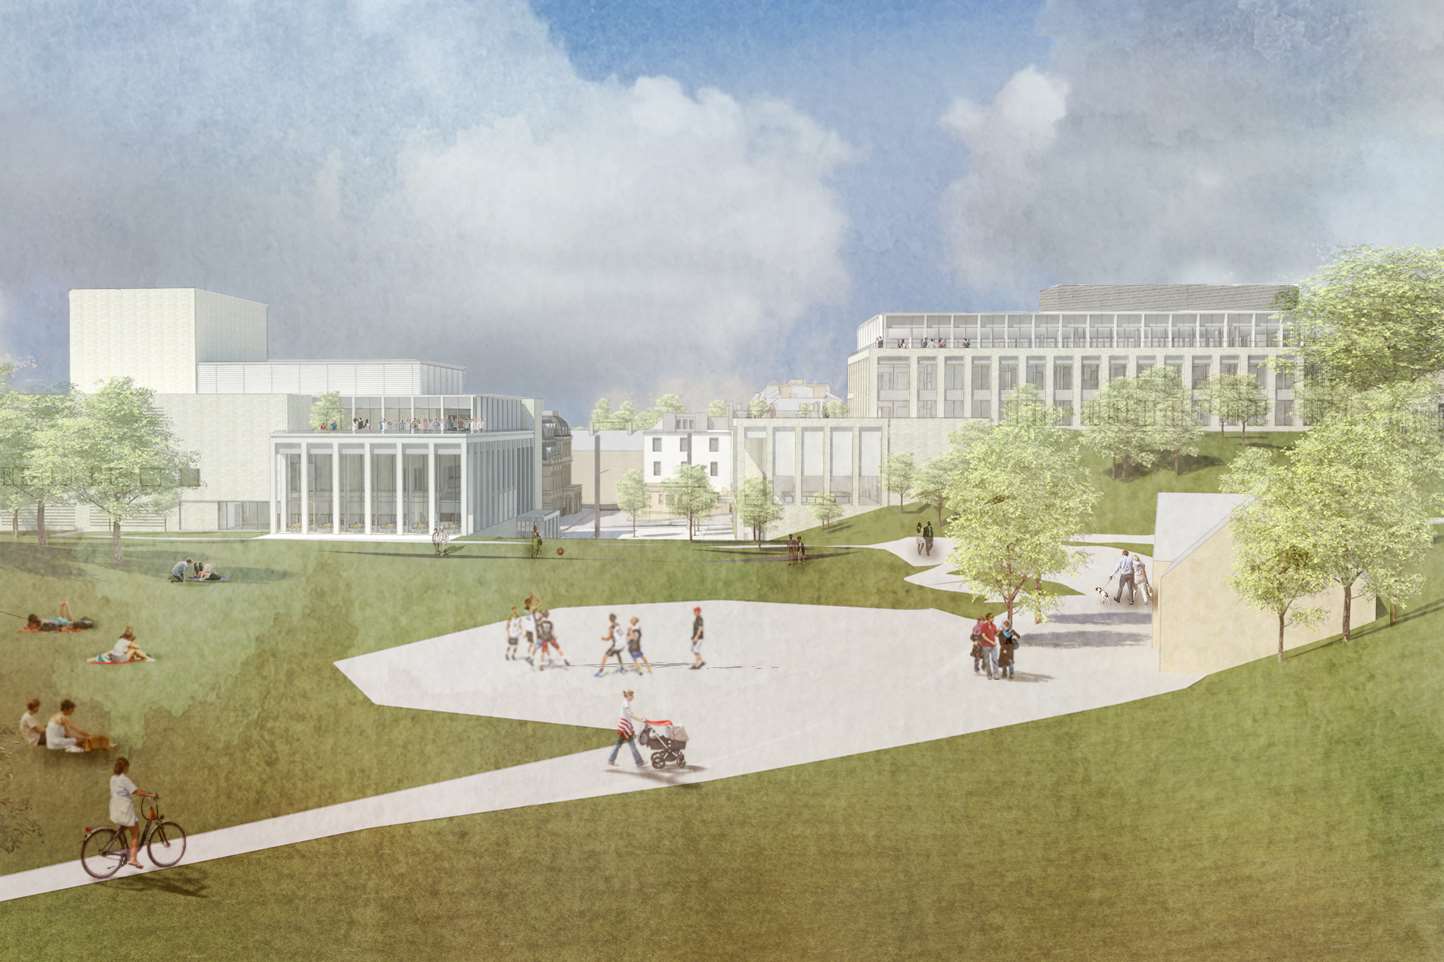 An artist's impression of the proposed civic centre from Calverley Grounds